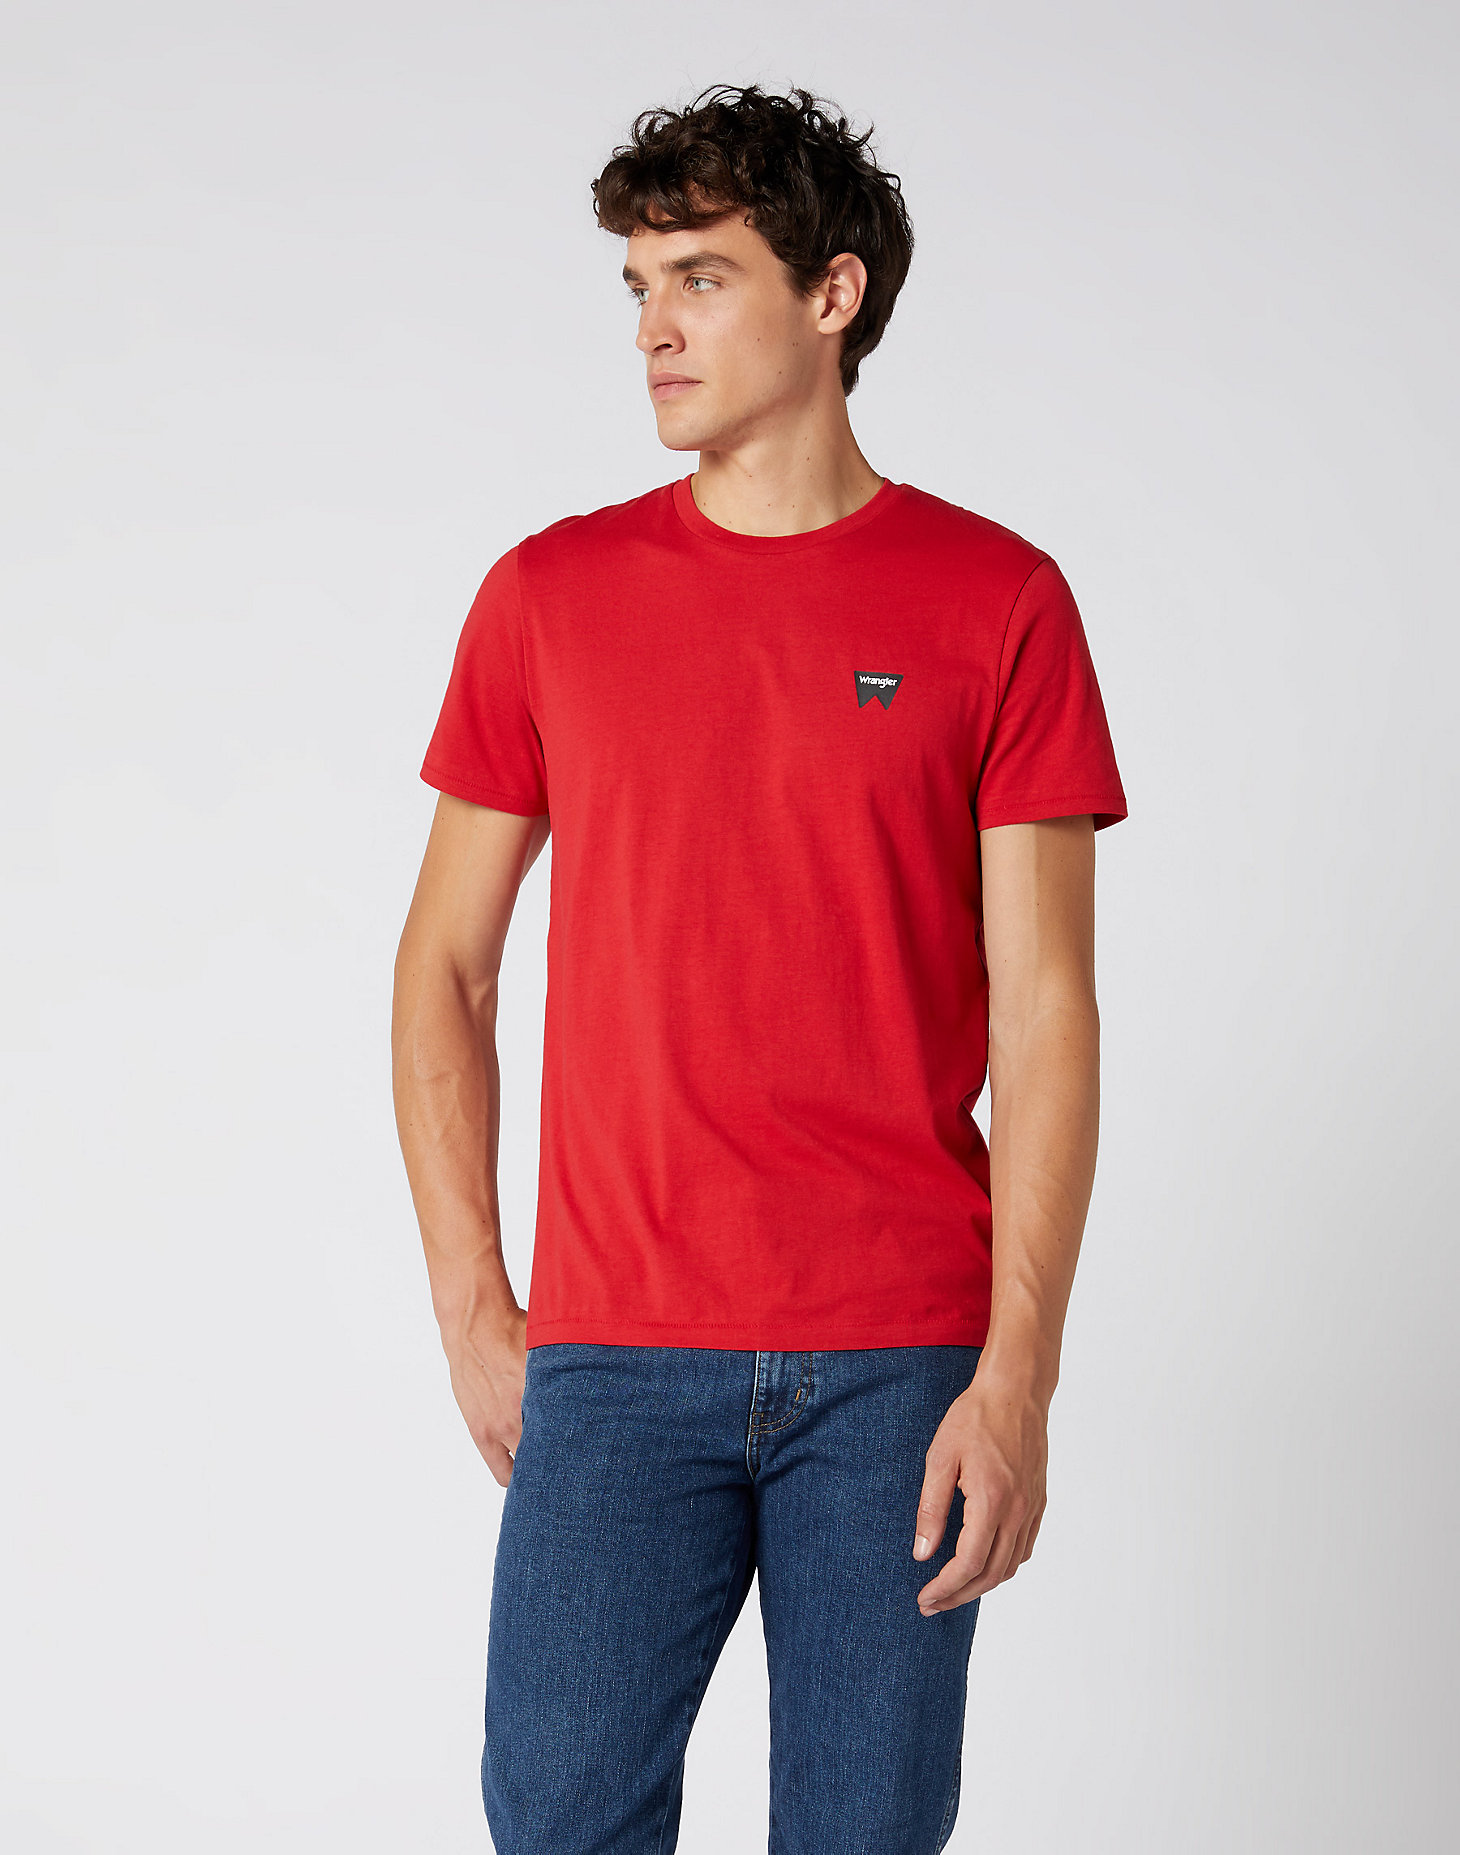 Sign Off Tee in Scarlet Red alternative view 5